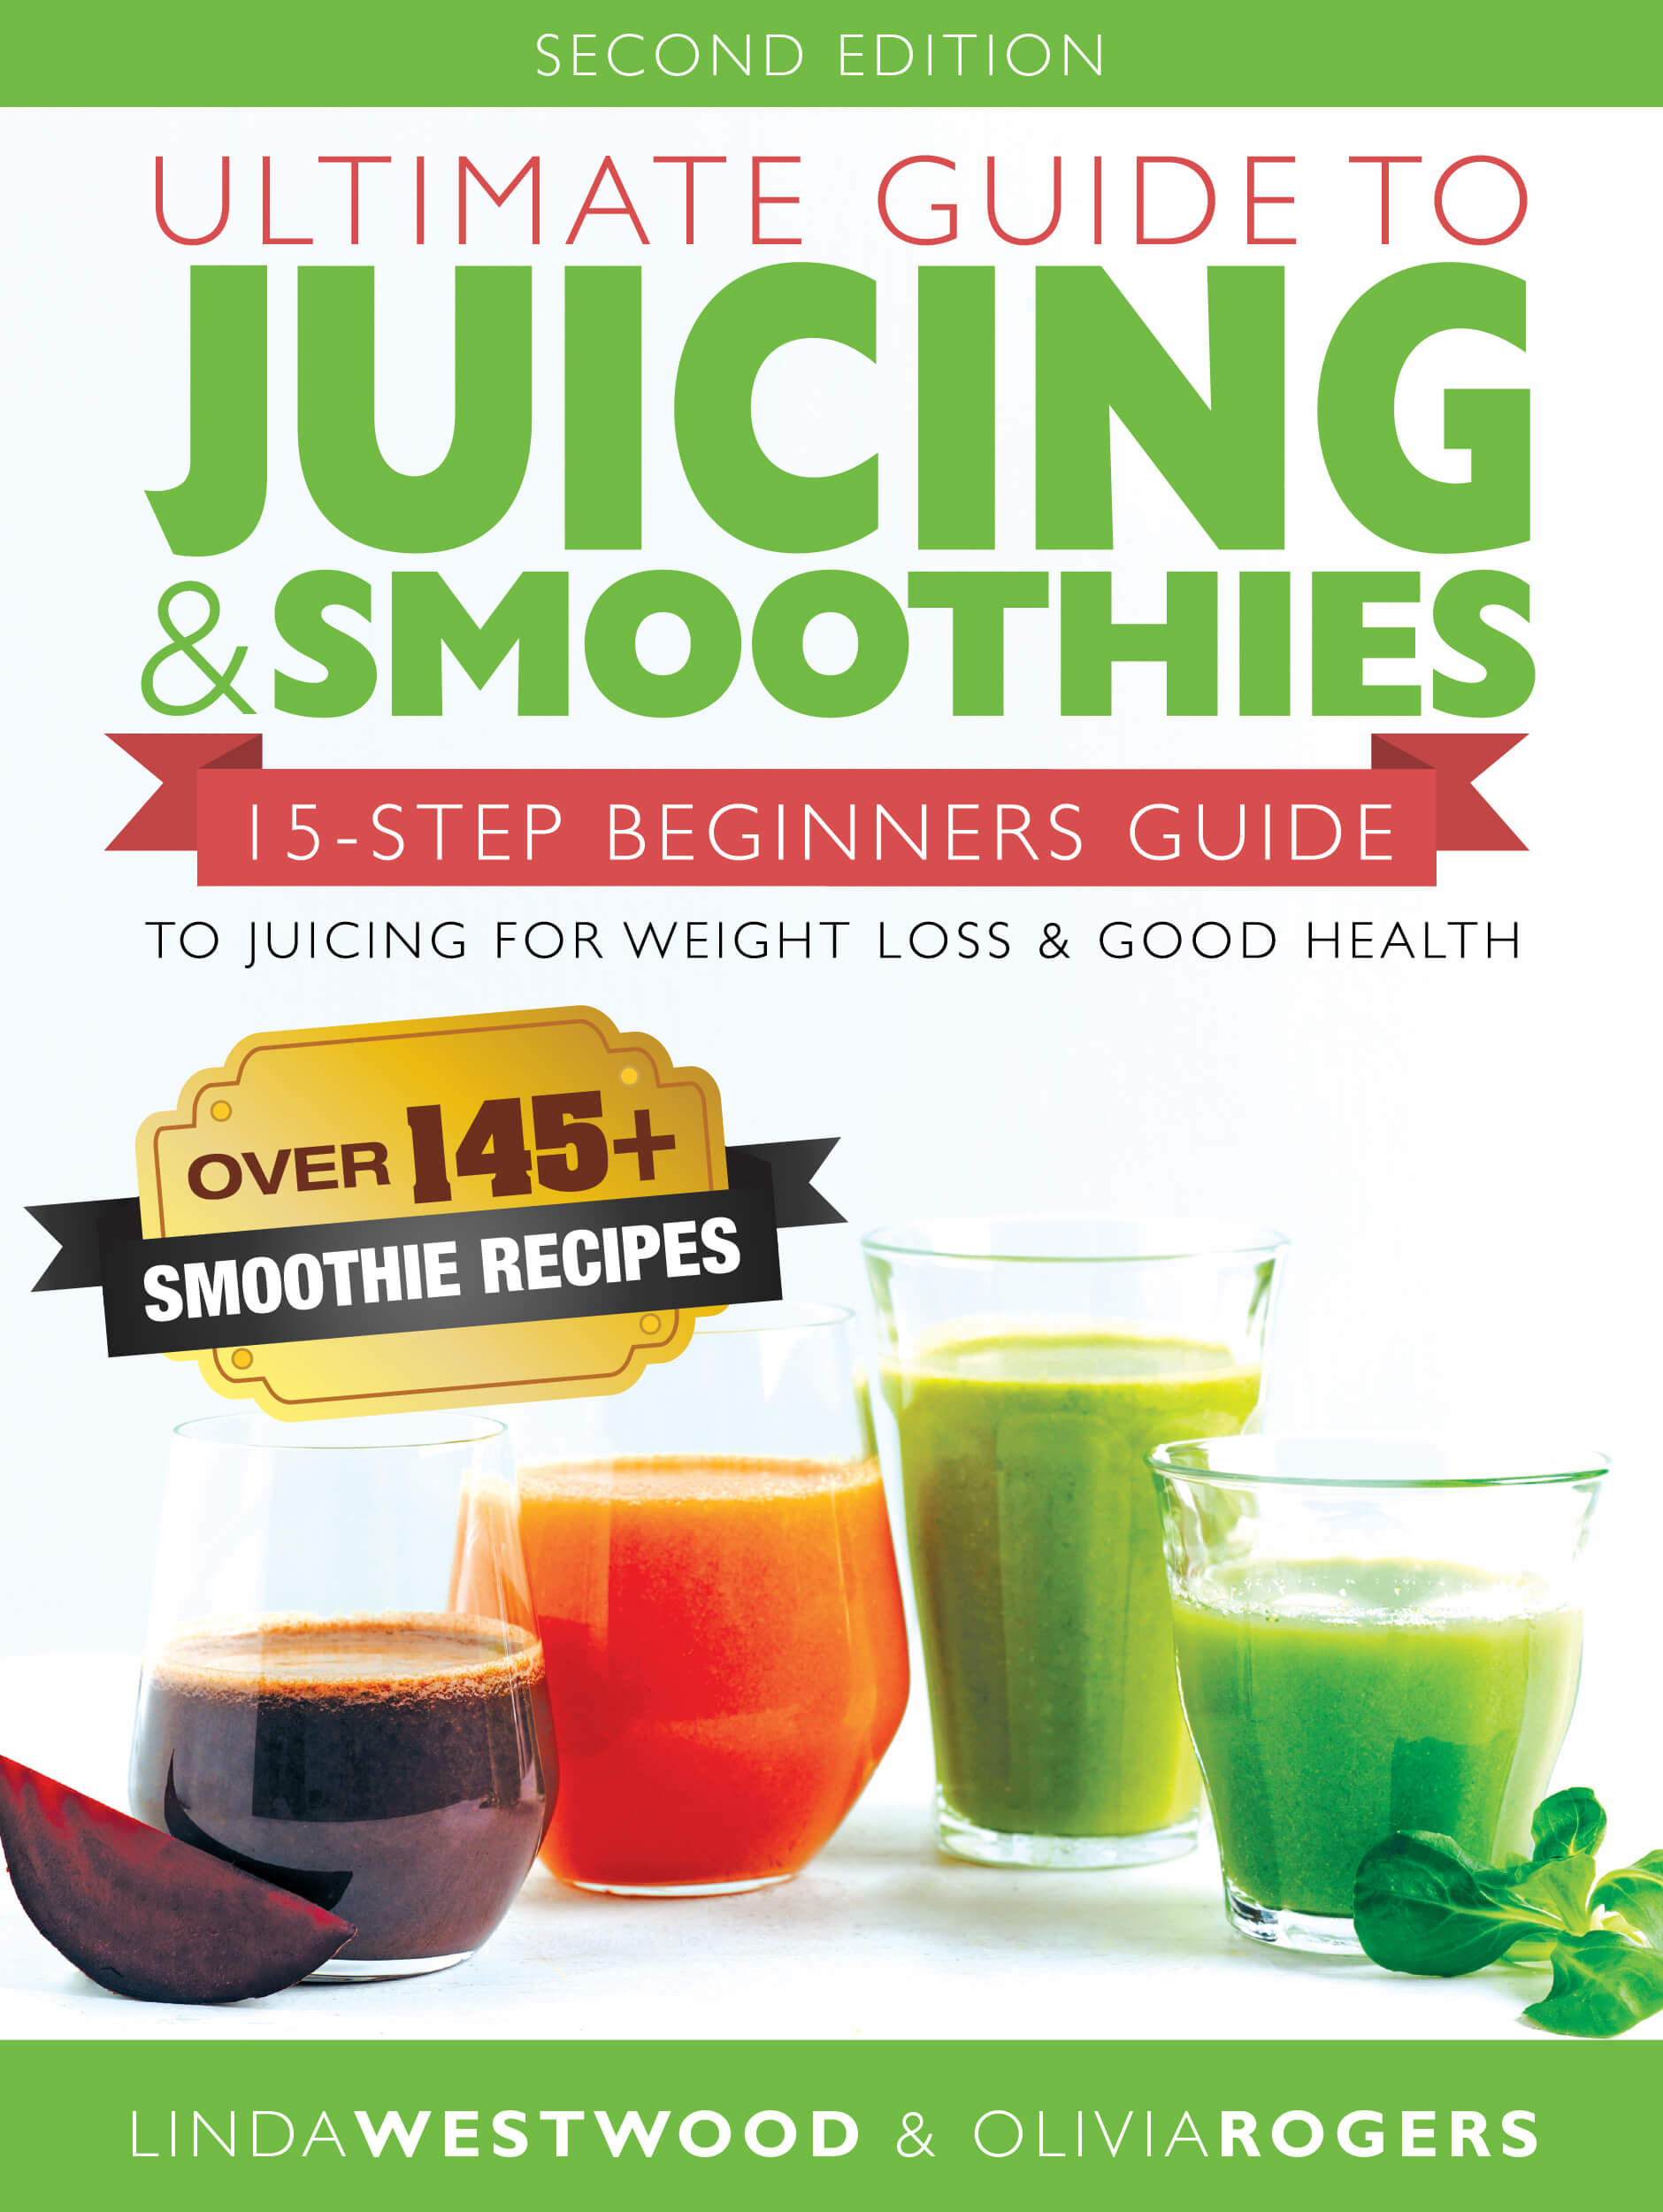 FREE: Ultimate Guide to Juicing & Smoothies: 15-Step Beginners Guide to Juicing for Weight Loss & Good Health (BONUS: Over 145+ Smoothie Recipes) by Linda Westwood